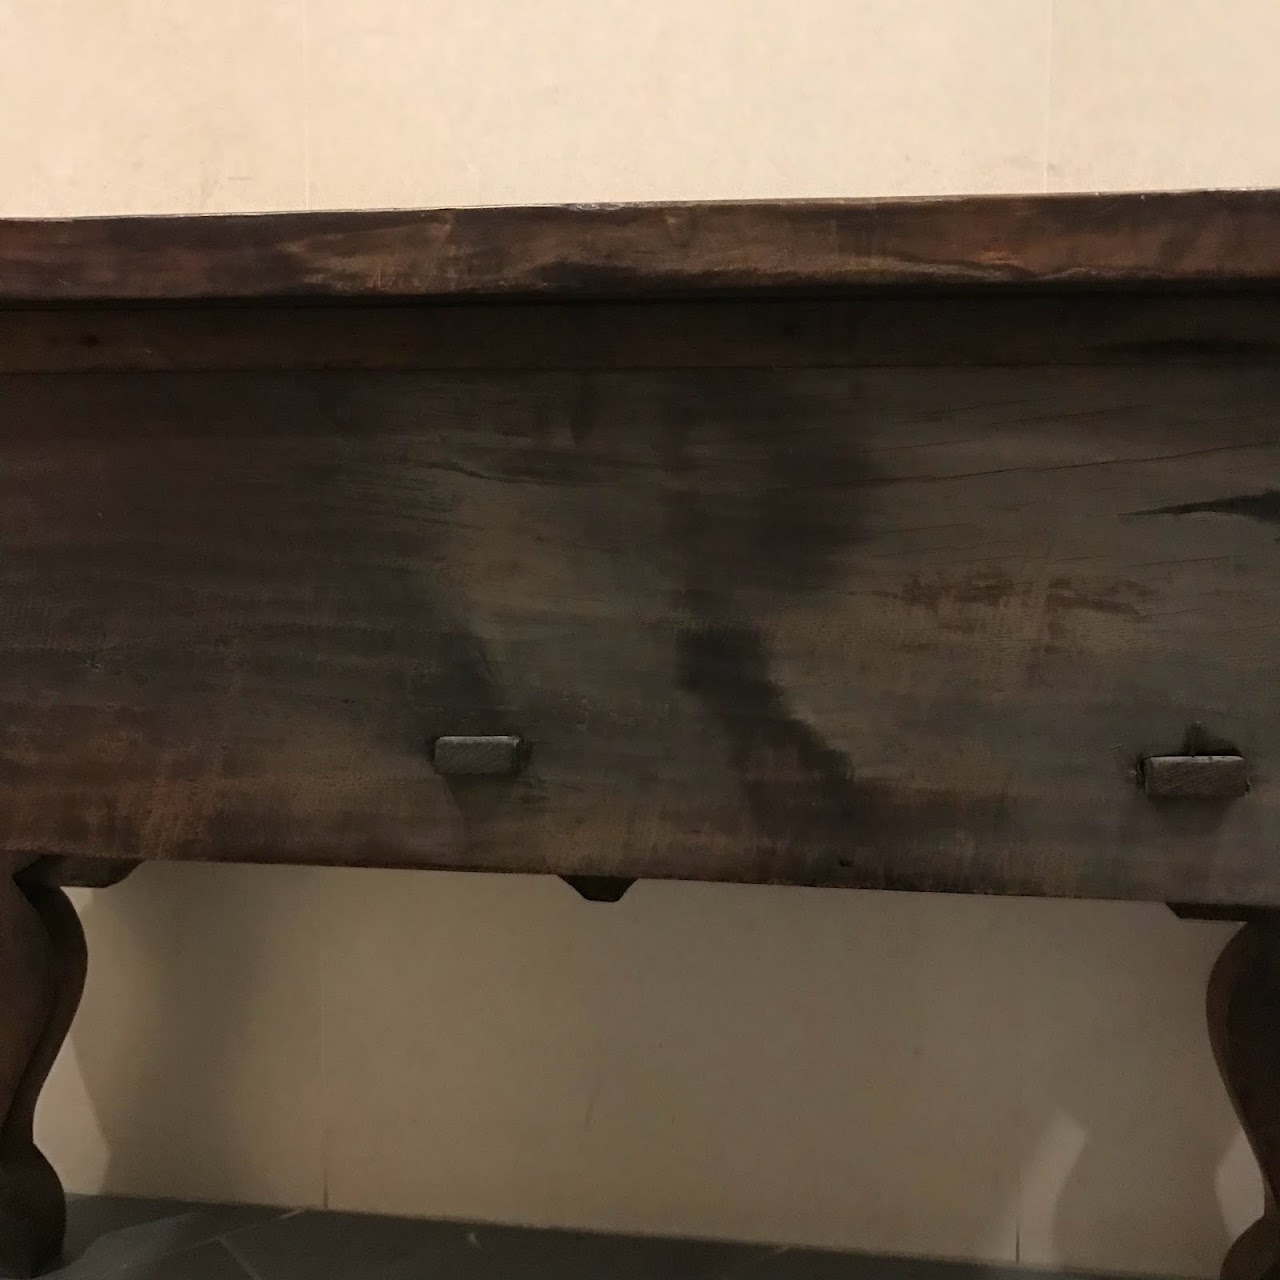 Primitive Hand-Carved Entry Table